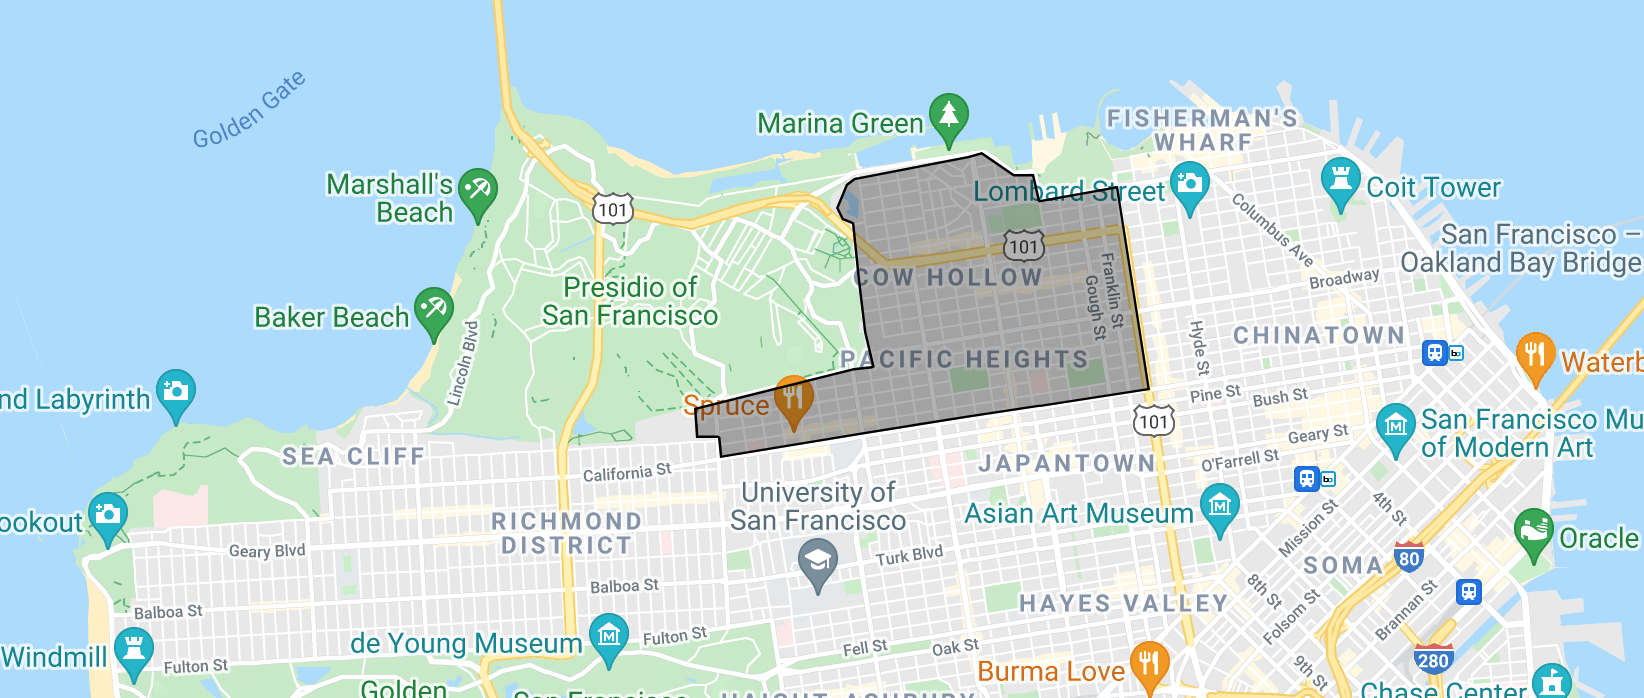 map of district 7 sf